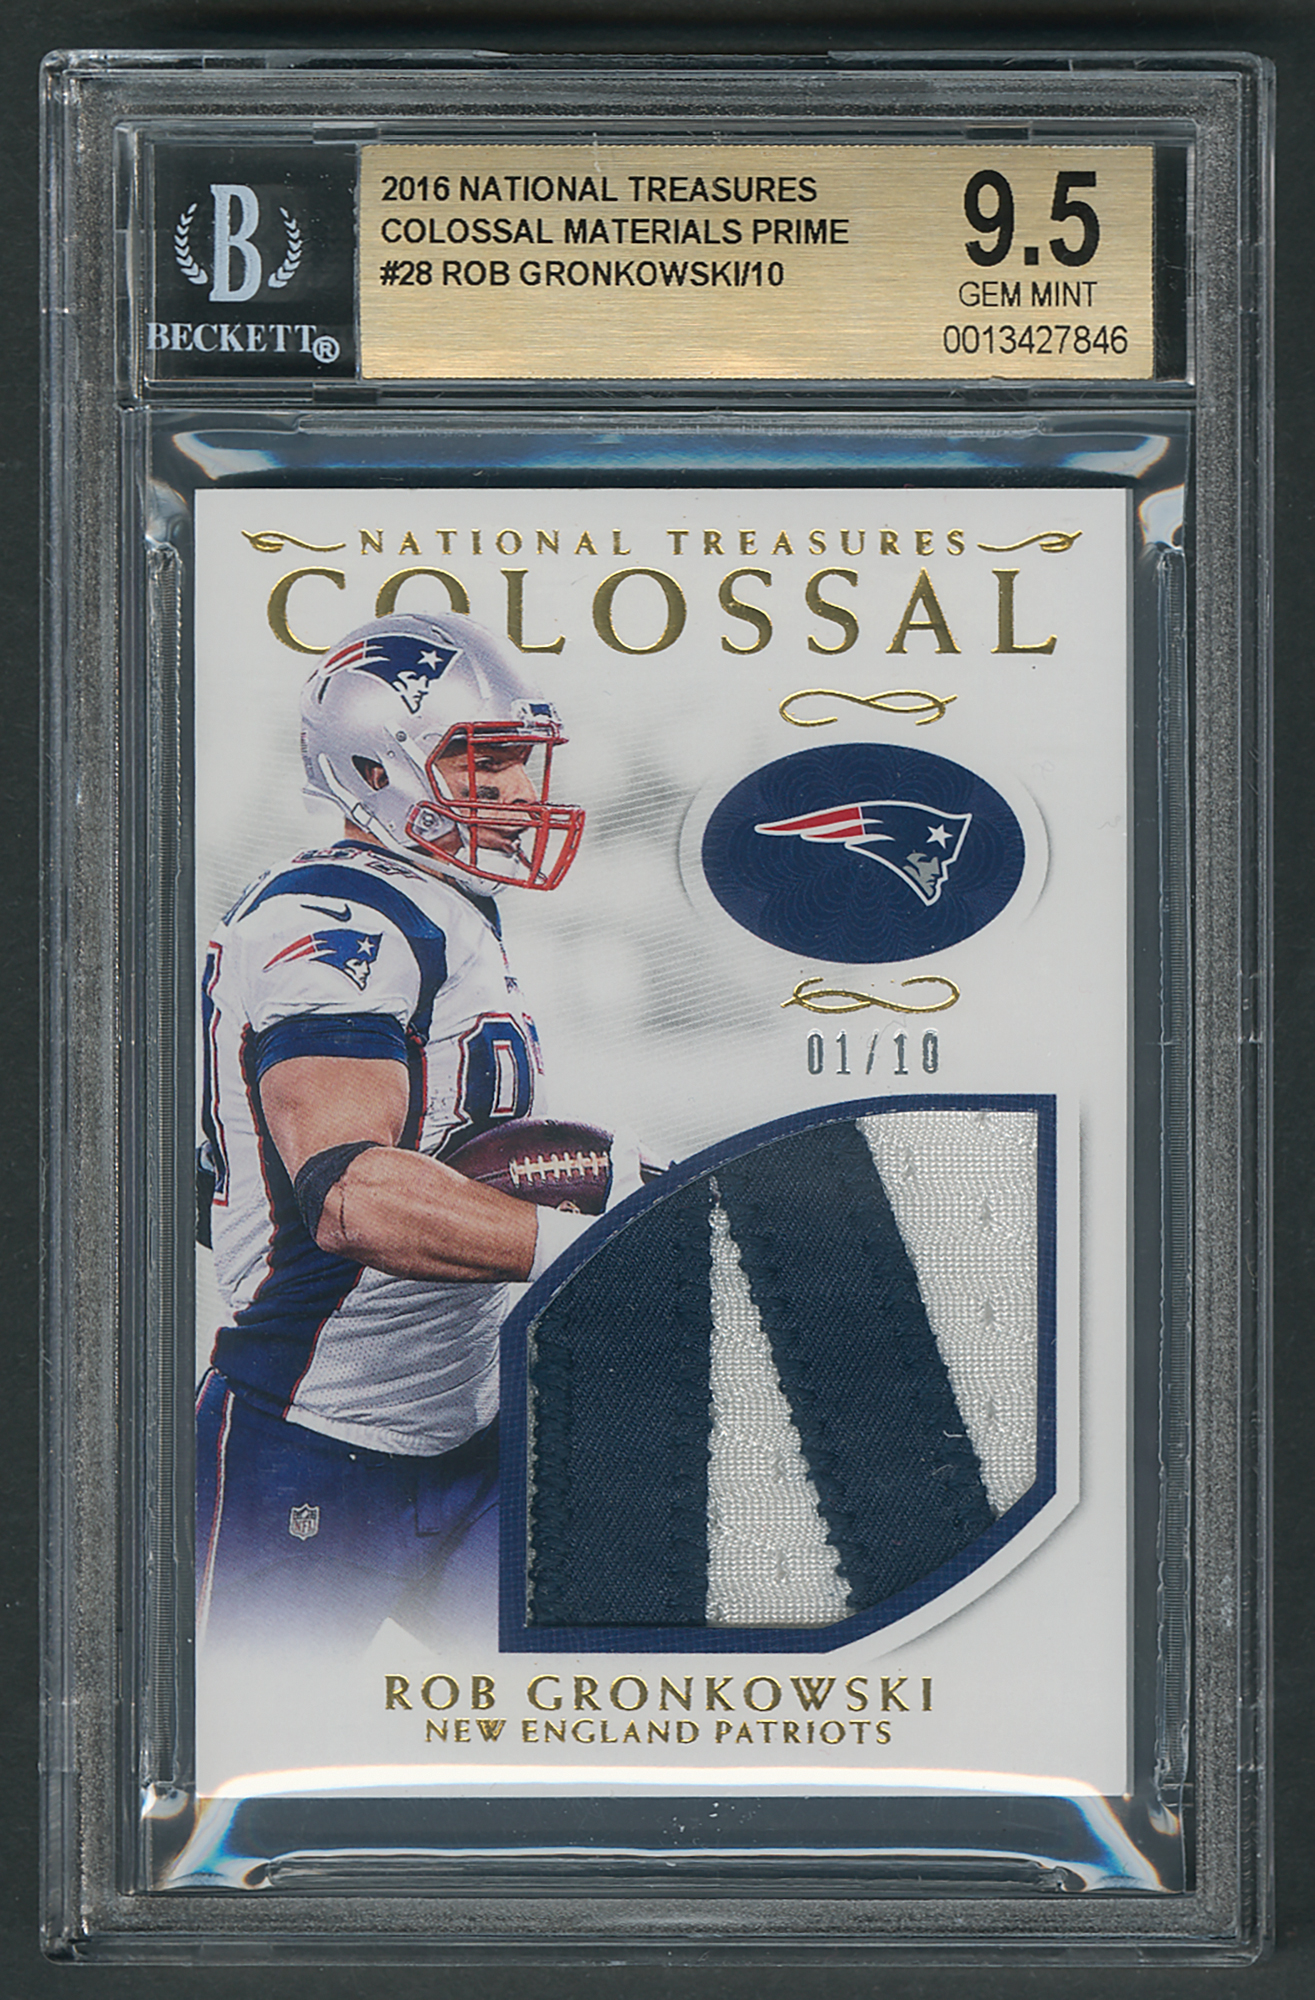 Lot #1020 2016 National Treasures Colossal Materials Prime Rob Gronkowski Patch (1/10) BGS GEM MINT 9.5